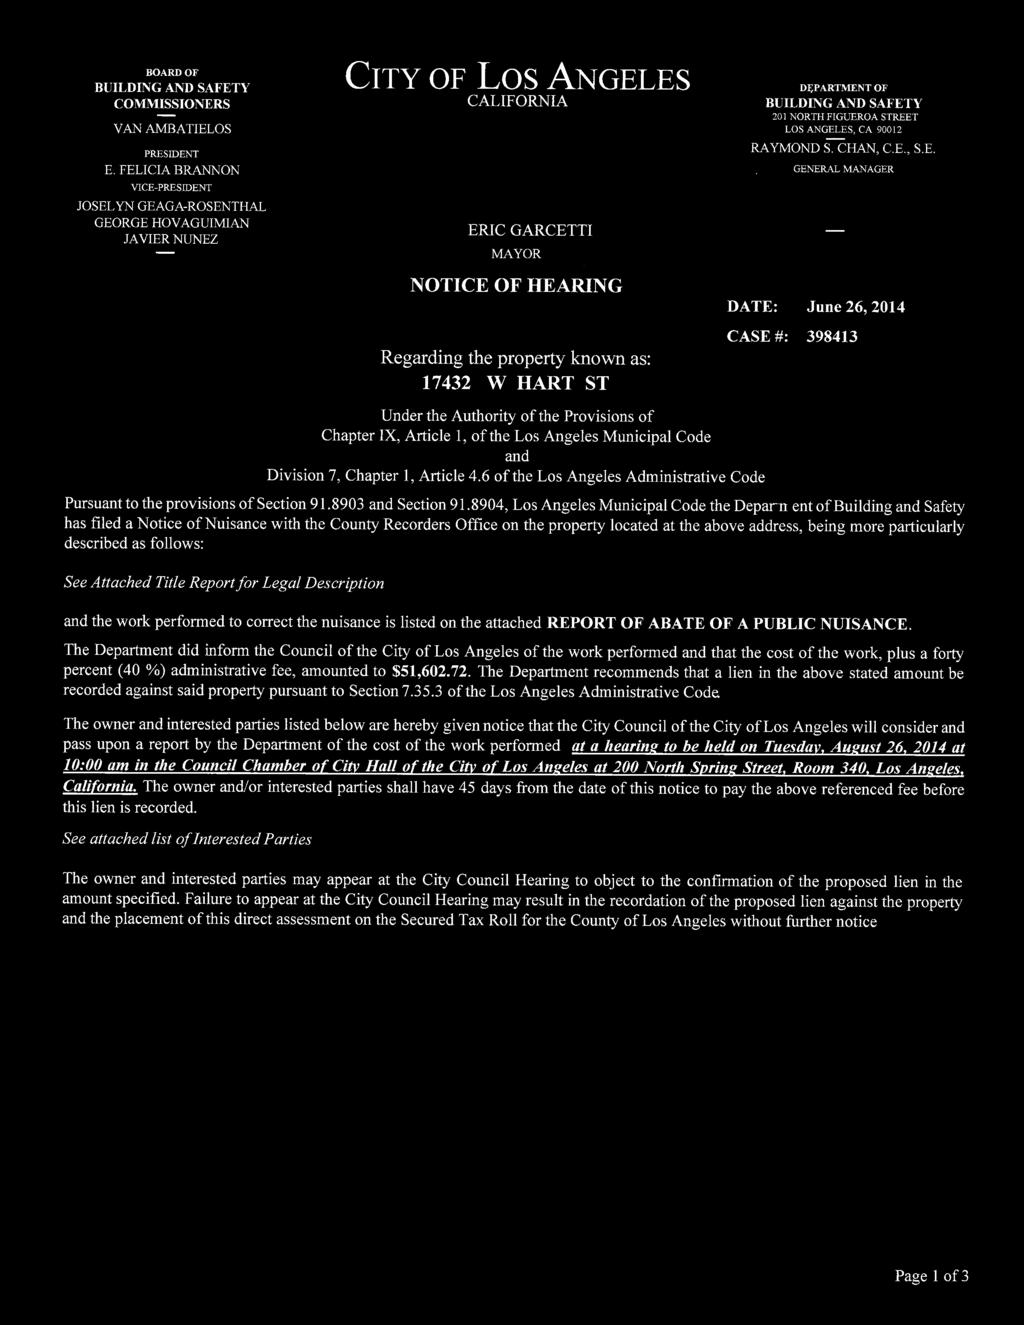 HART ST DEPARTMENT OF BUILDING AND SAFETY 201 NORTH FIGUEROA STREET LOS ANGELES, CA 90012 RAYMOND S. CHAN, C.E., S.E. GENERAL MANAGER DATE: June 26, 2014 CASE #: 398413 Under the Authority of the Provisions of Chapter IX, Article 1, of the Los Angeles Municipal Code and Division 7, Chapter 1, Article 4.